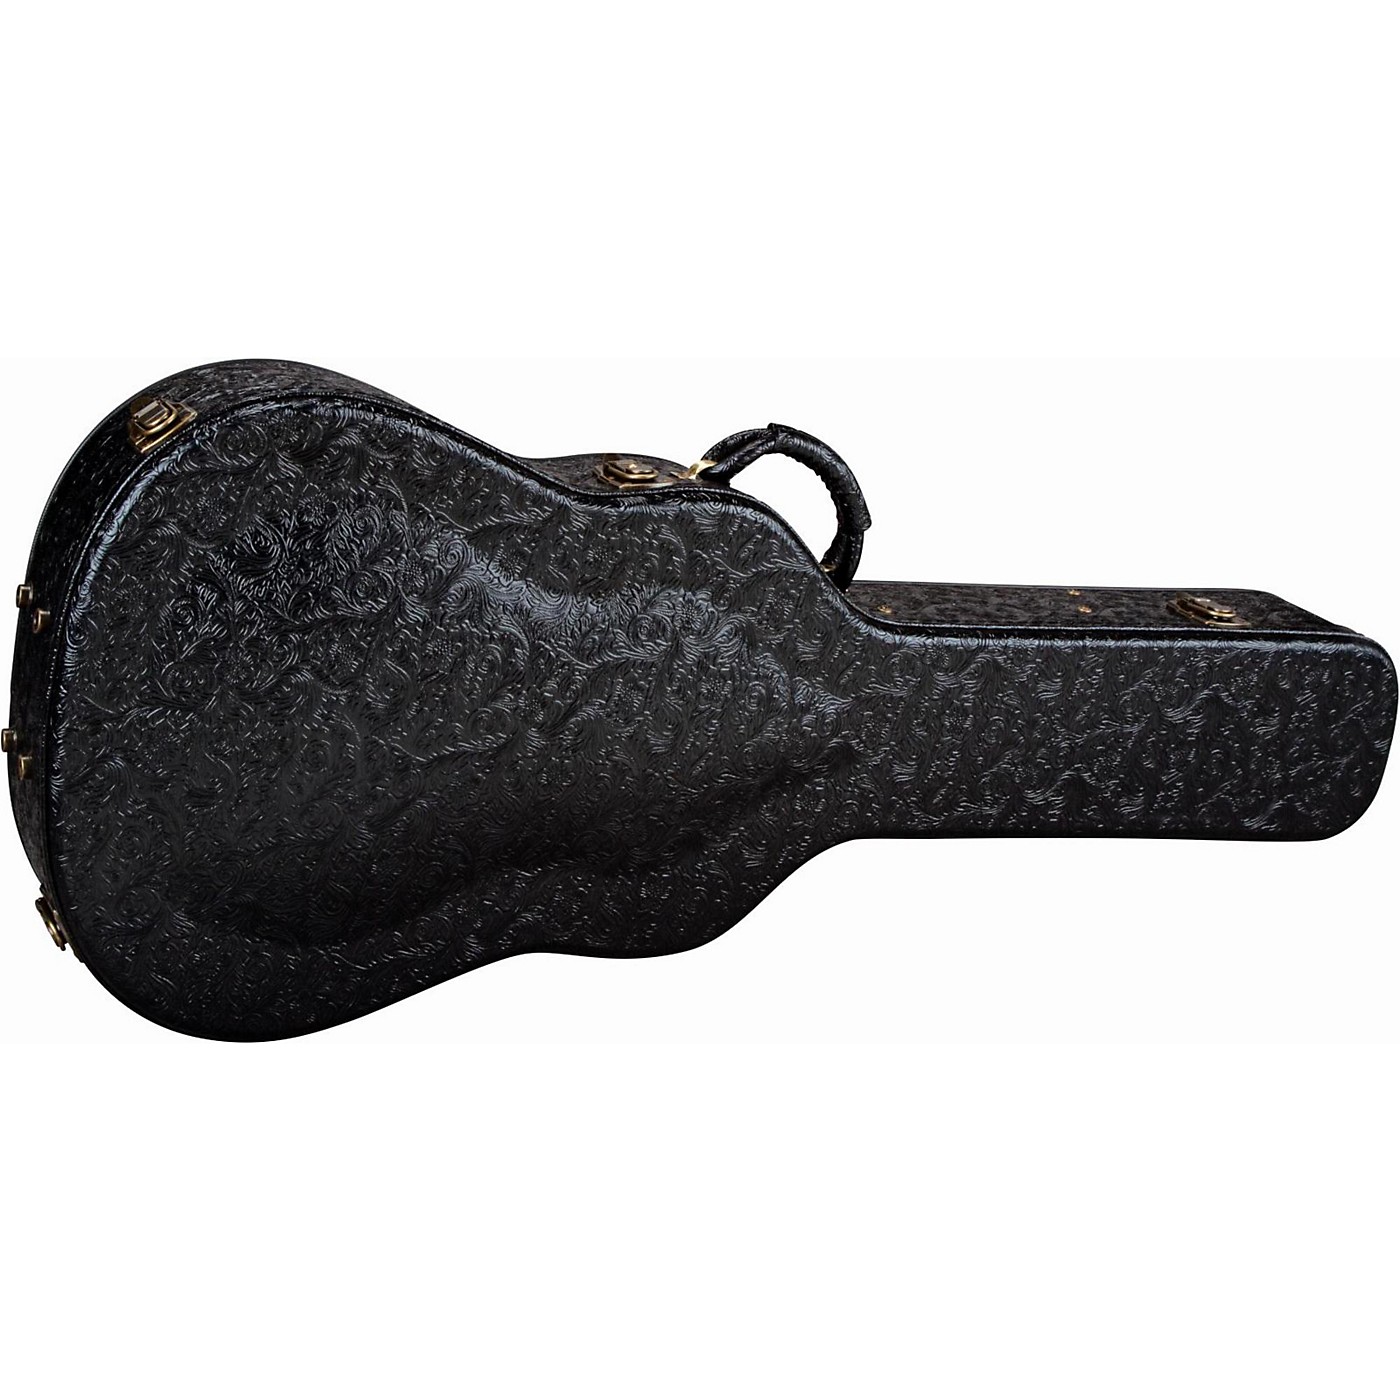 Luna Guitars Dreadnought / Grand Concert Acoustic Guitar Tooled Leather Look Hardshell Case thumbnail